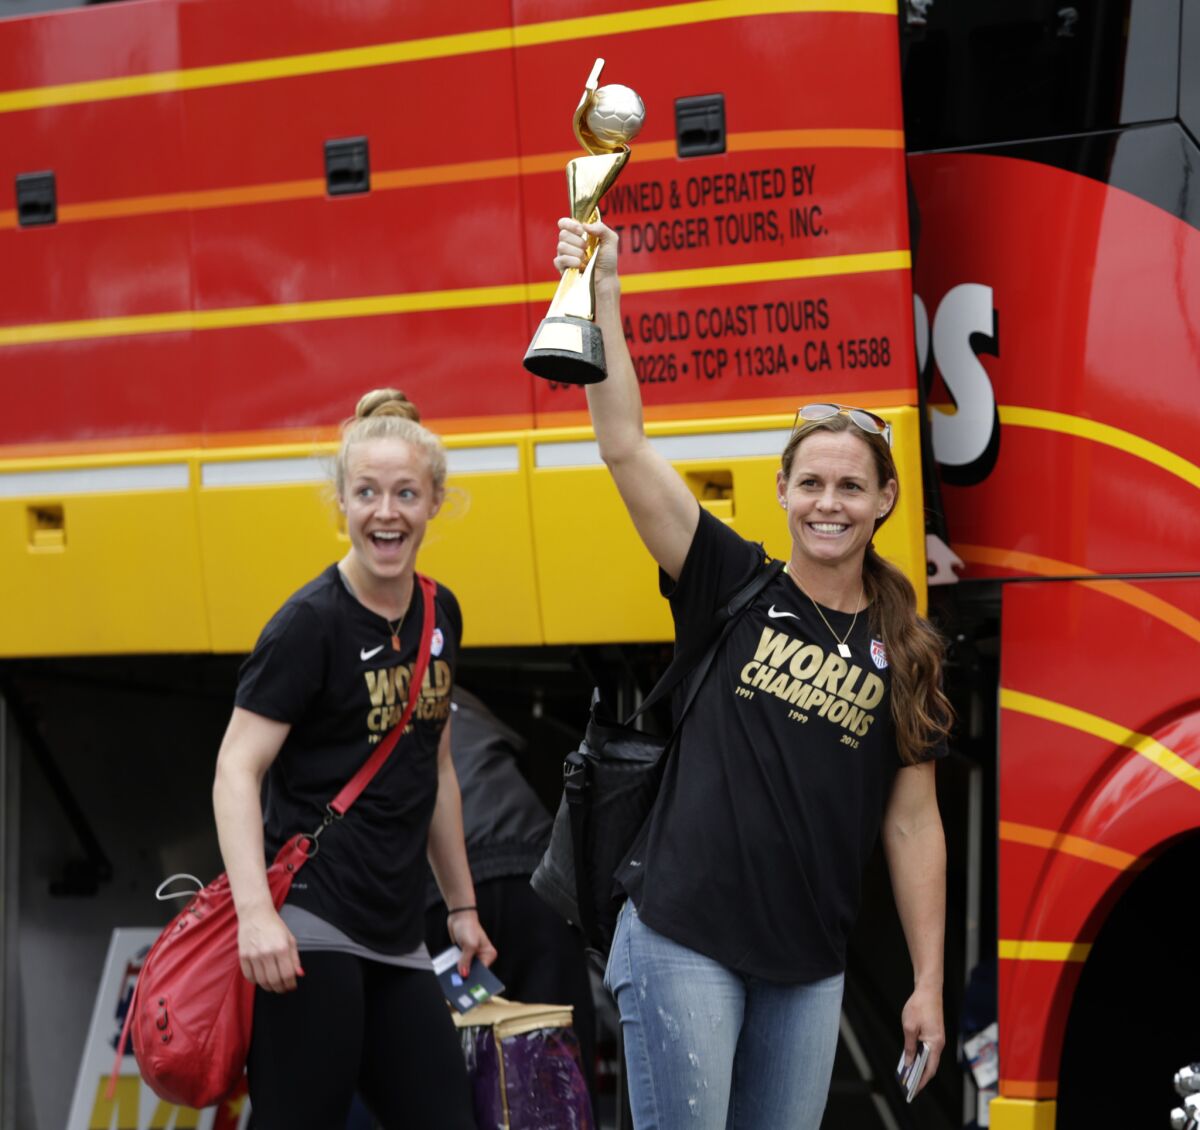 LOS ANGELES, CA JUL. 06, 2015. U.S. WOMEN'S NATIONAL TEAM captain Christie Rampone with the world cup and teammate Becky Sauerbrunn arriving at LAX from Canada on Jul 06, 2015. U.S. WOMEN'S NATIONAL TEAM arriving at LAX after wining the FIFA Women's World Cup in Canada.(Lawrence K. Ho / Los Angeles Times)